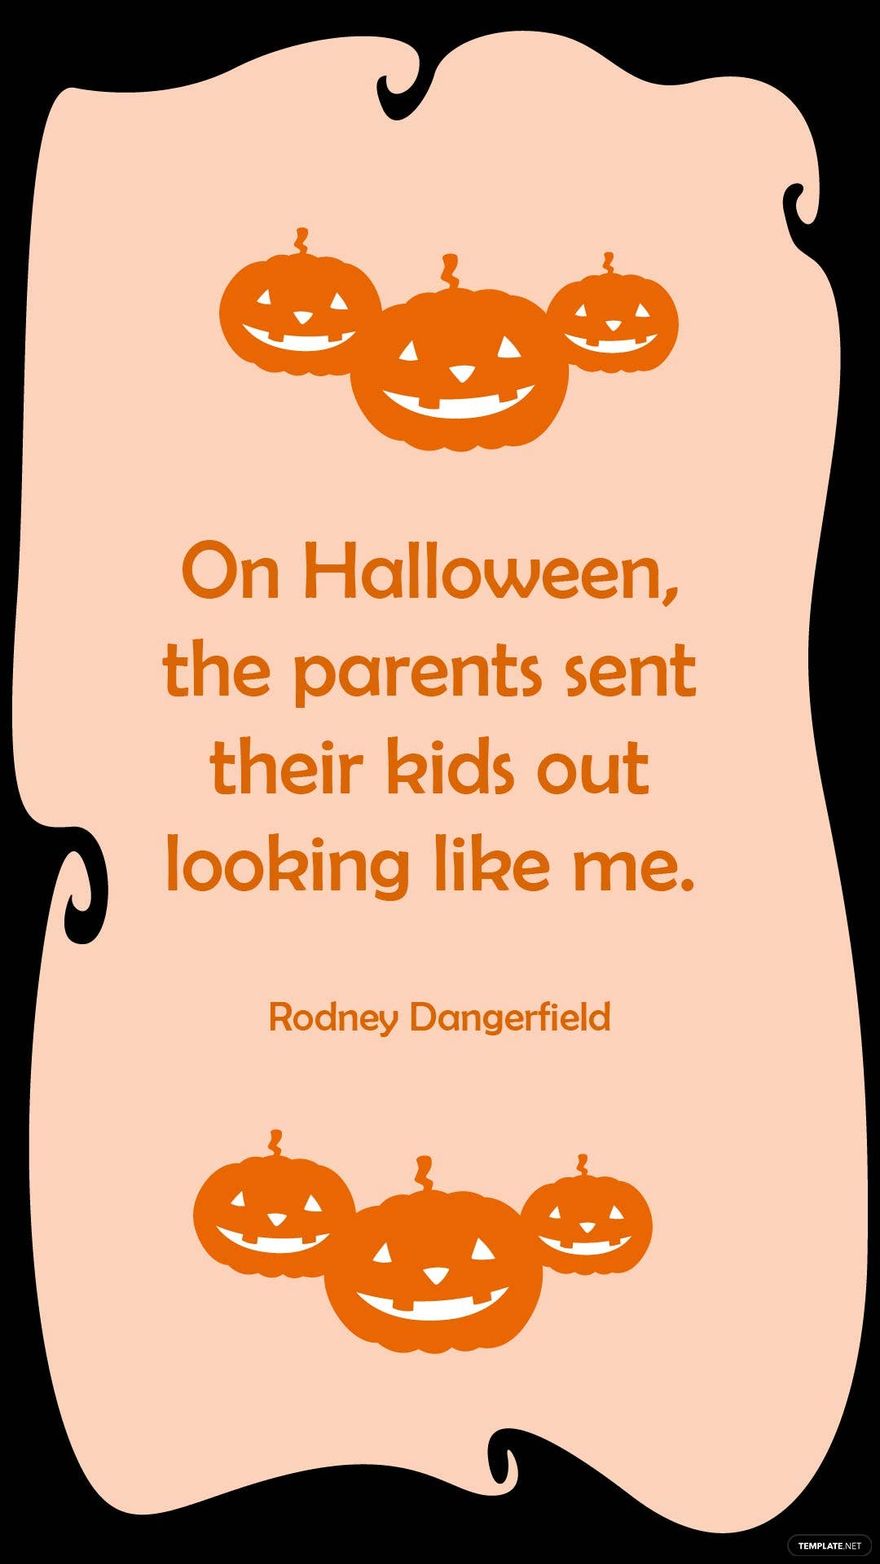 Rodney Dangerfield-On Halloween, the parents sent their kids out looking like me.